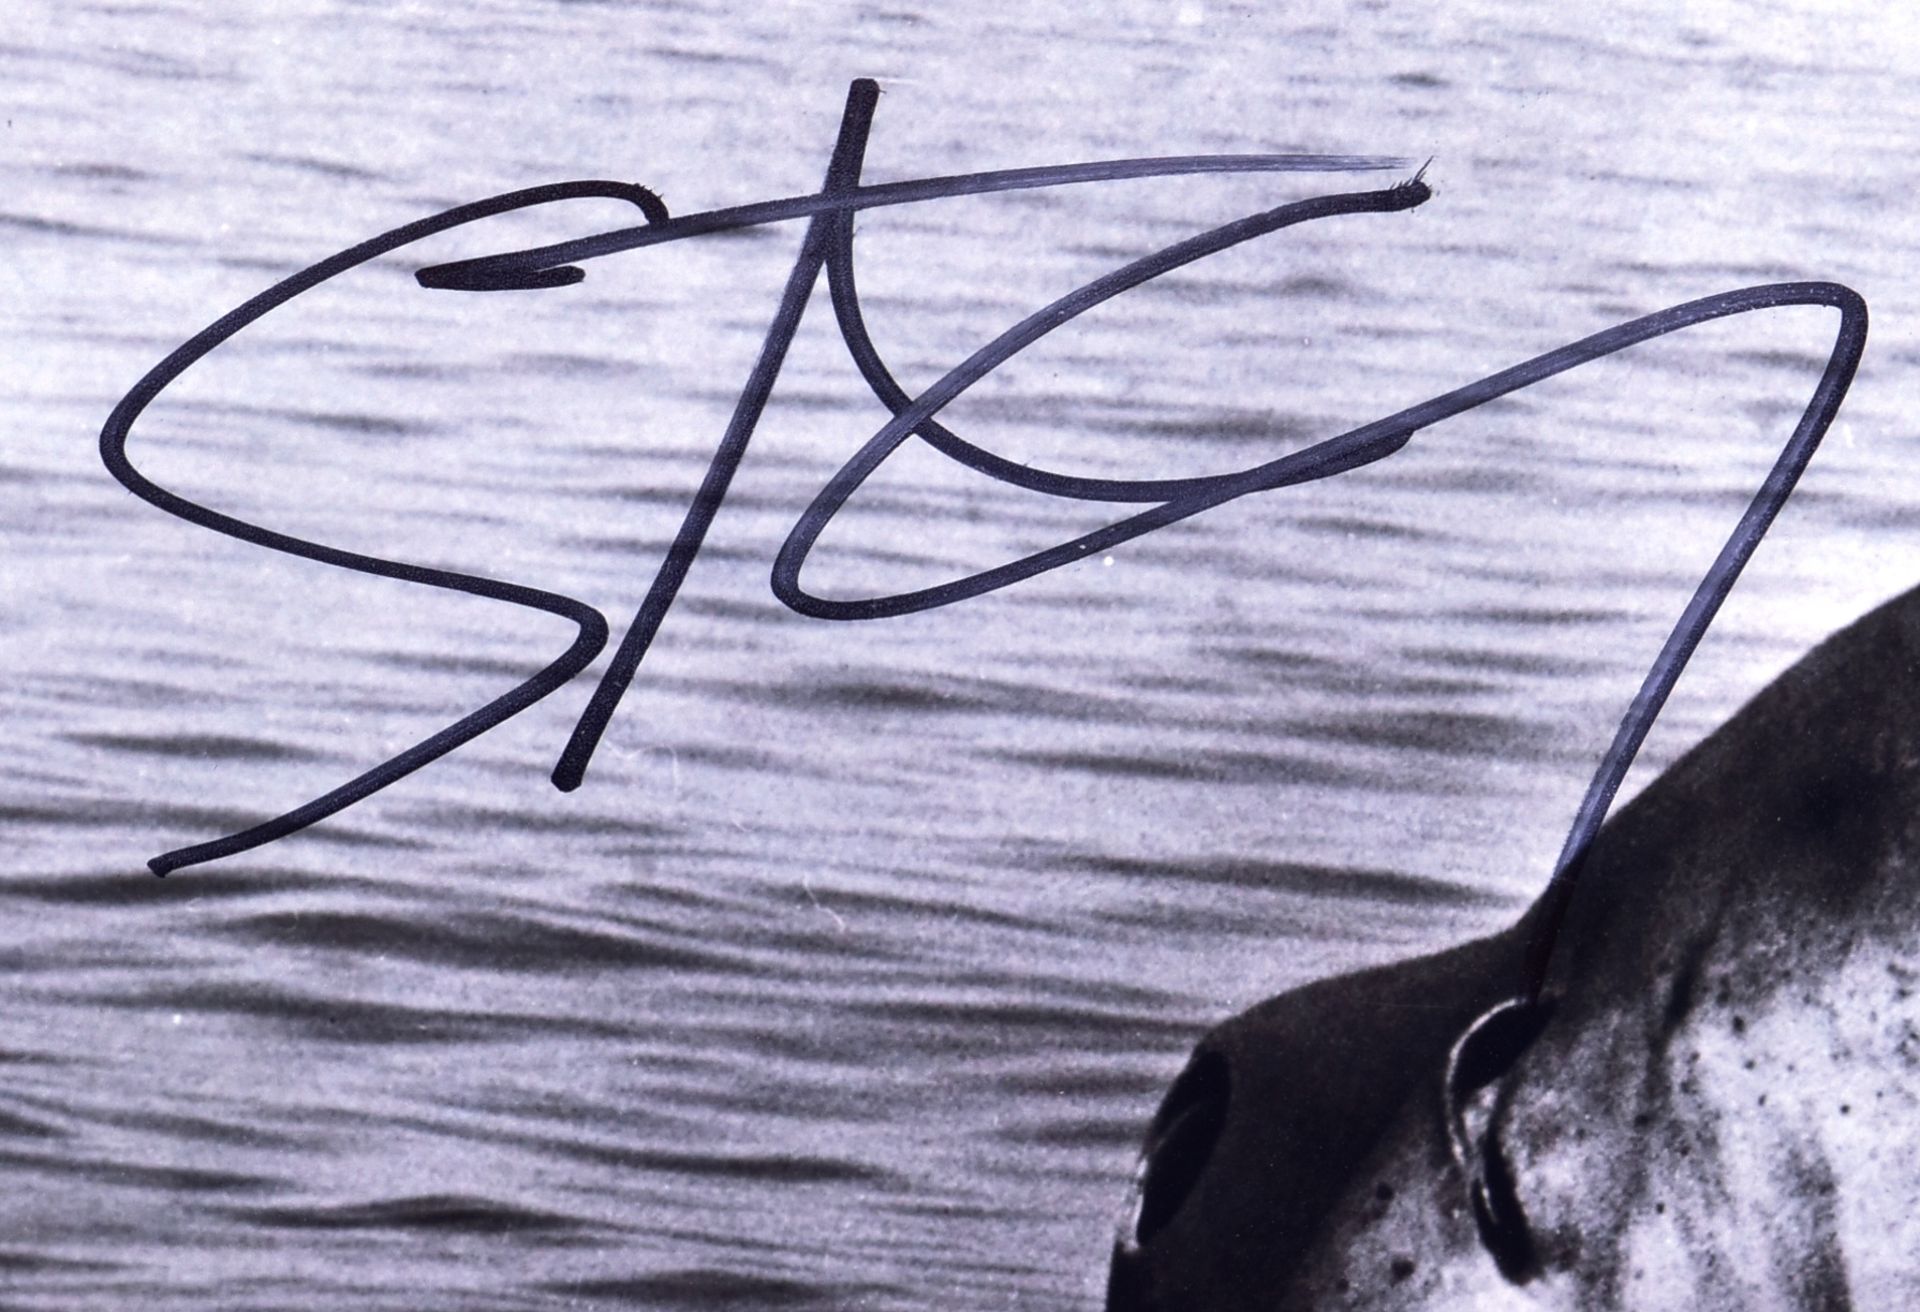 STEVEN SPIELBERG - JAWS - AUTOGRAPHED 8X10" PHOTOGRAPH - Image 2 of 3